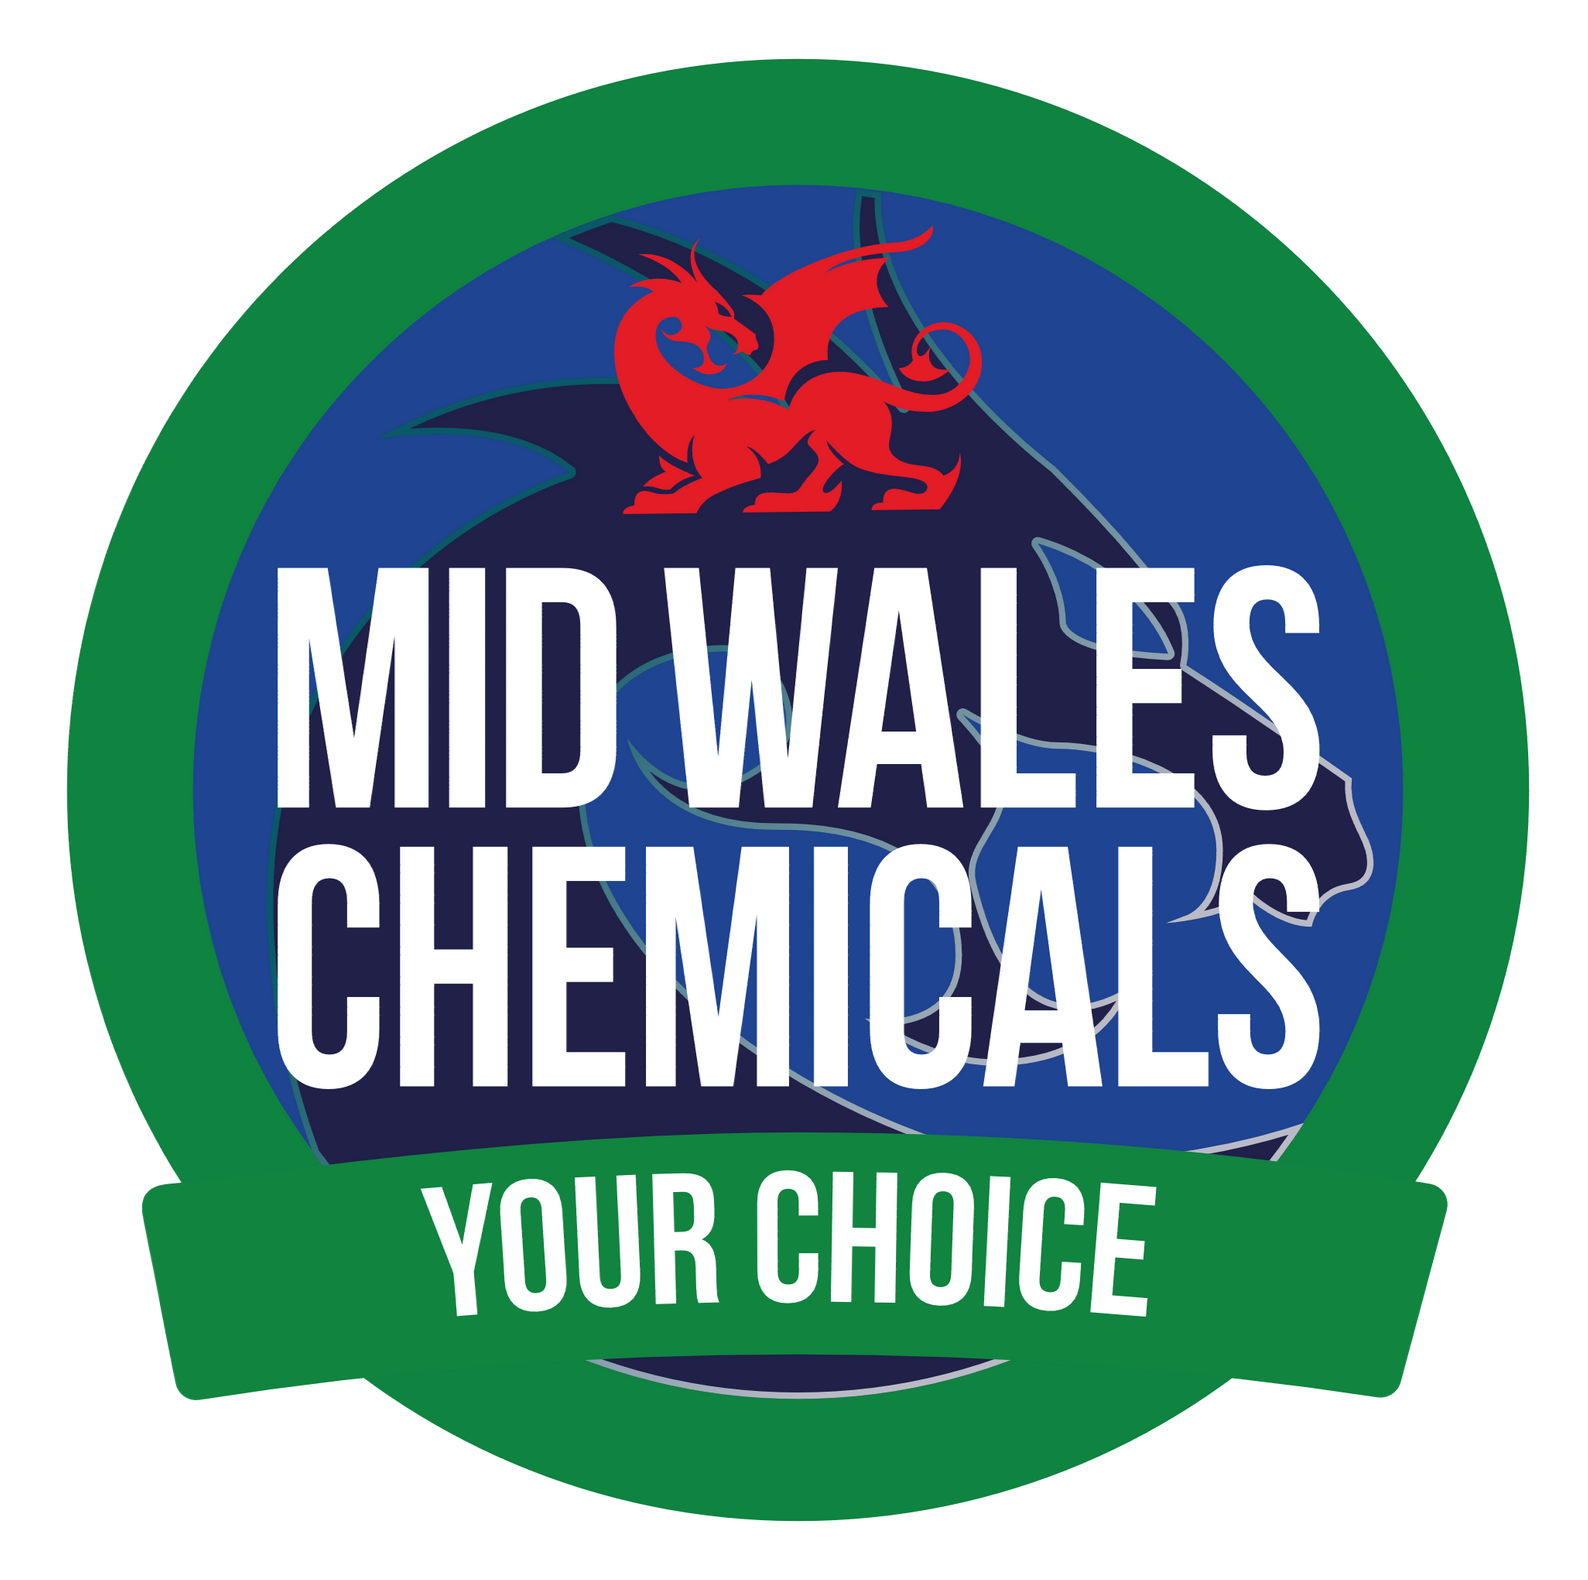 Mid Wales Chemicals logo